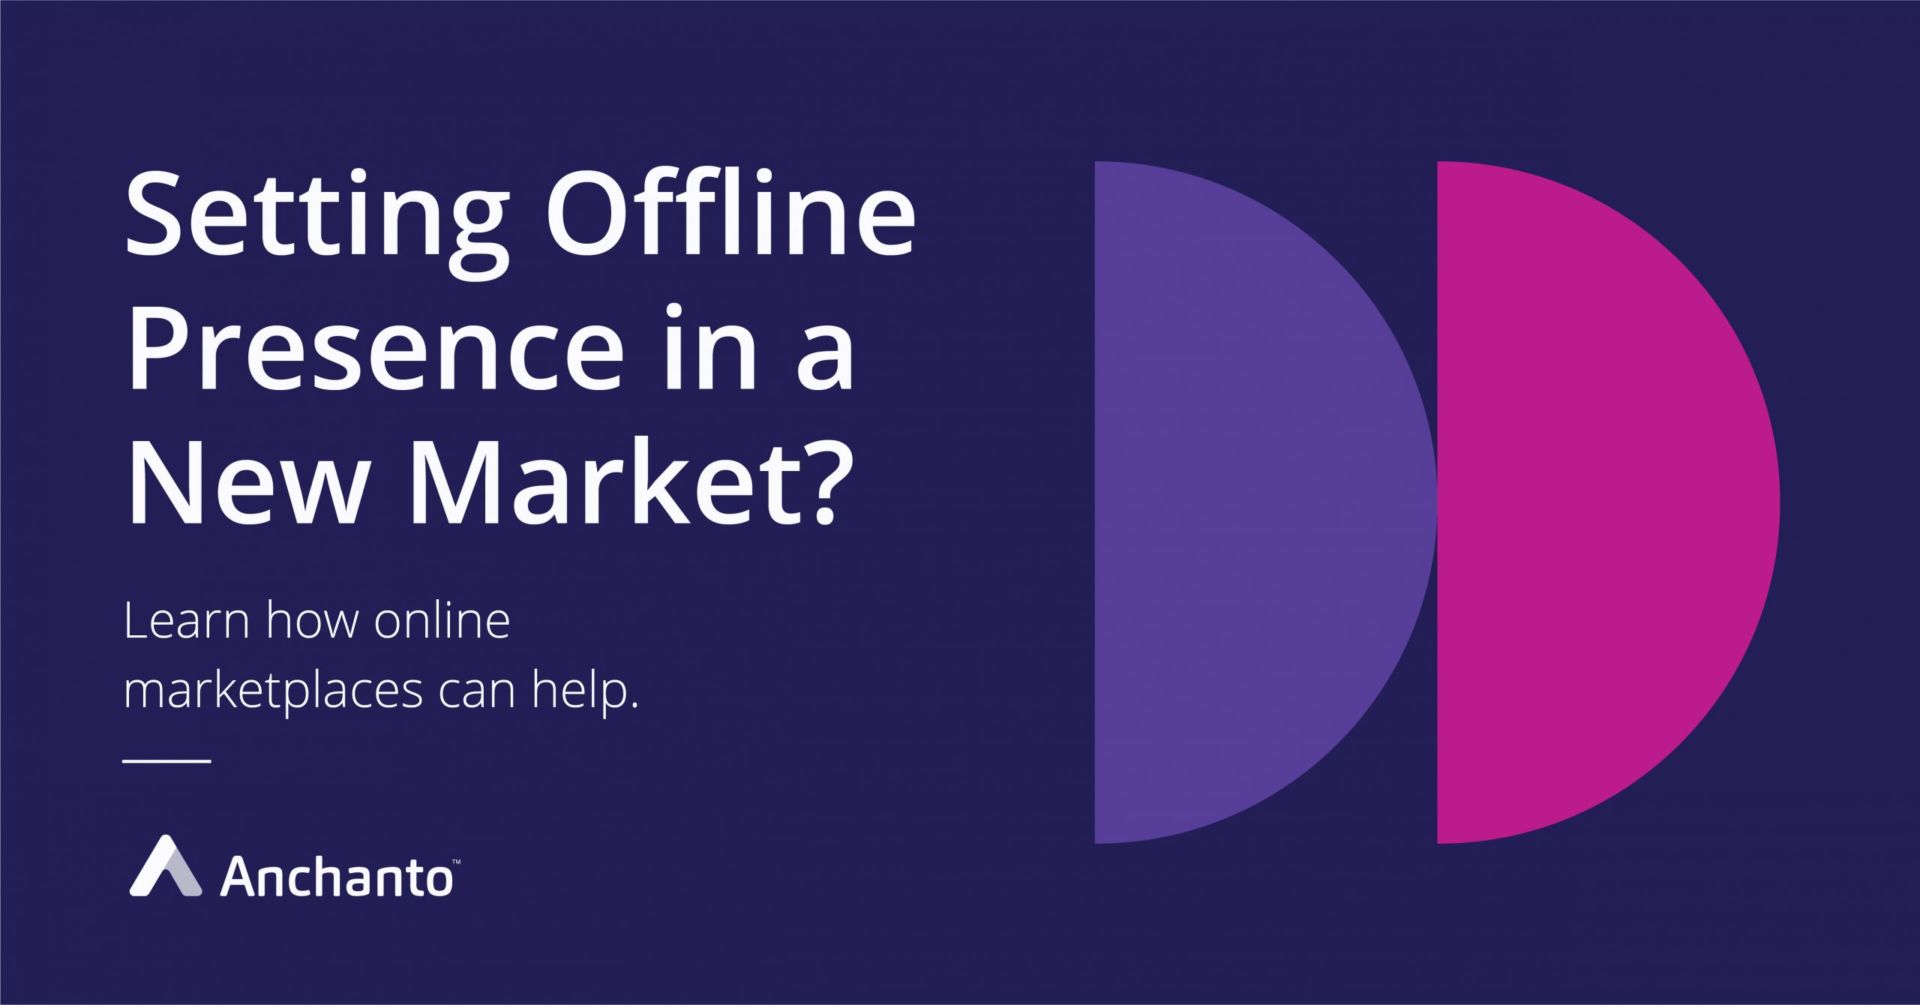 How E-commerce Marketplaces Can Help You Setup an Offline Presence in a New Market